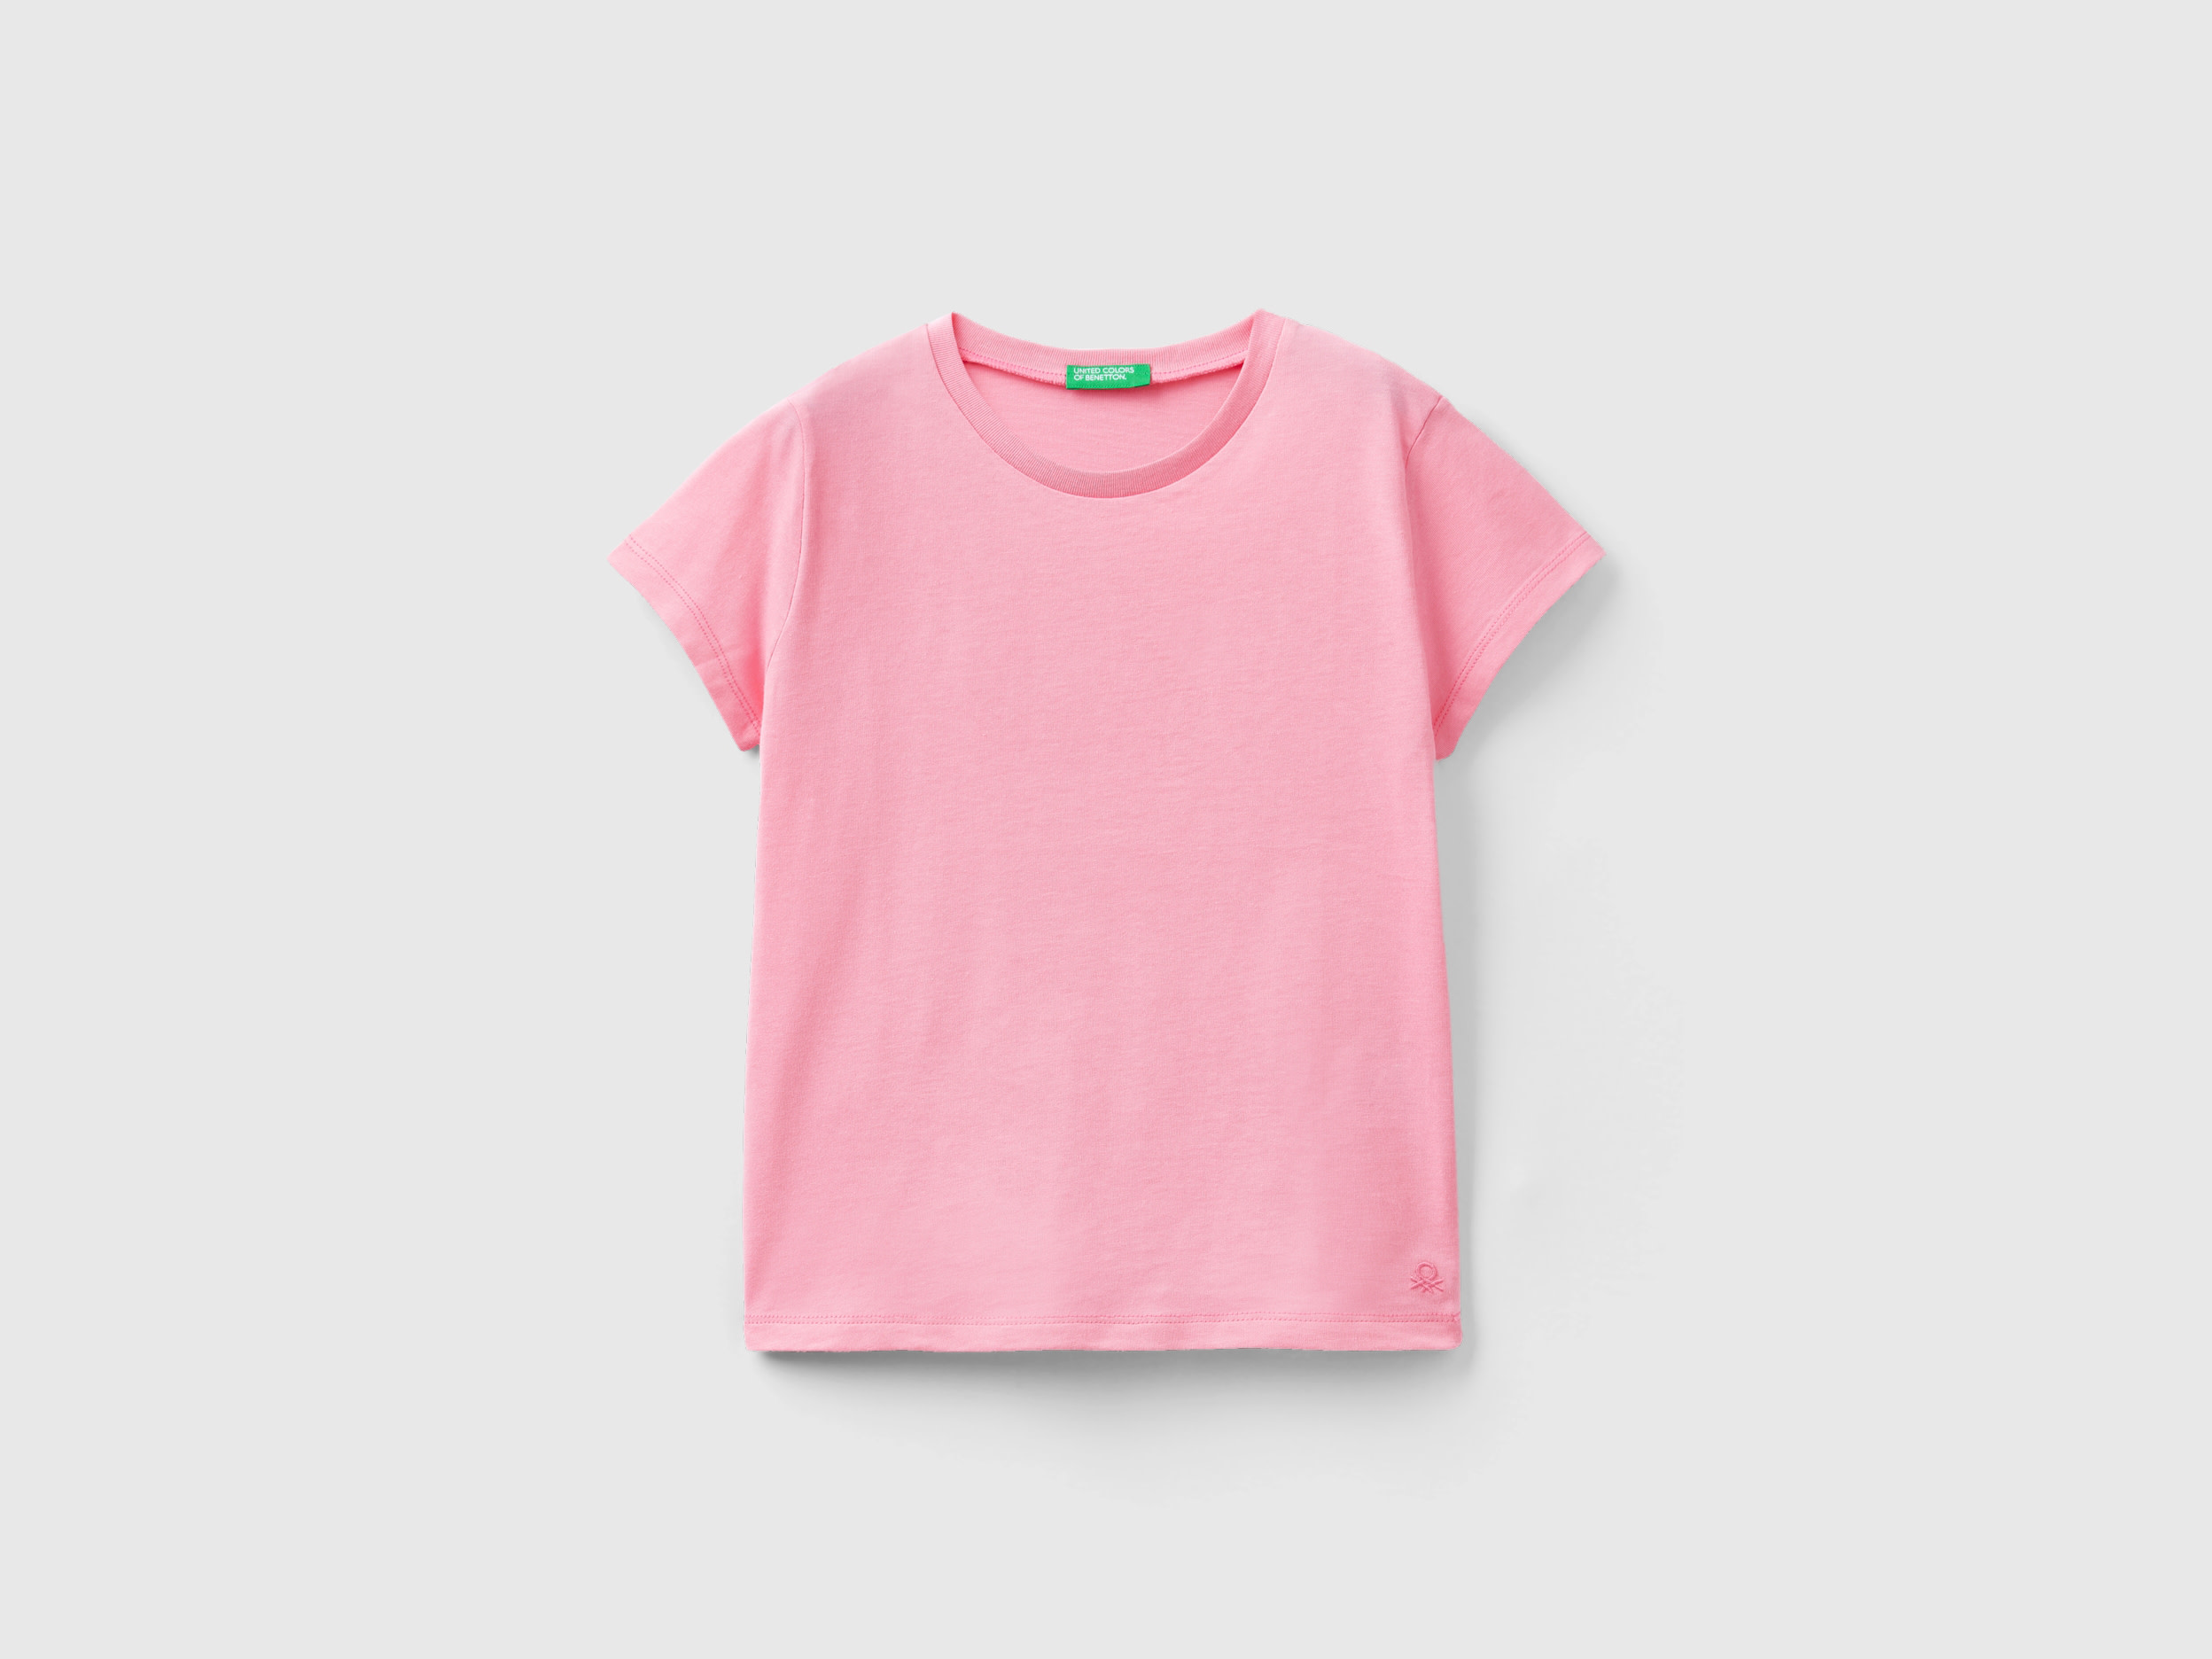 Image of Benetton, T-shirt In Pure Organic Cotton, size 2XL, Pink, Kids